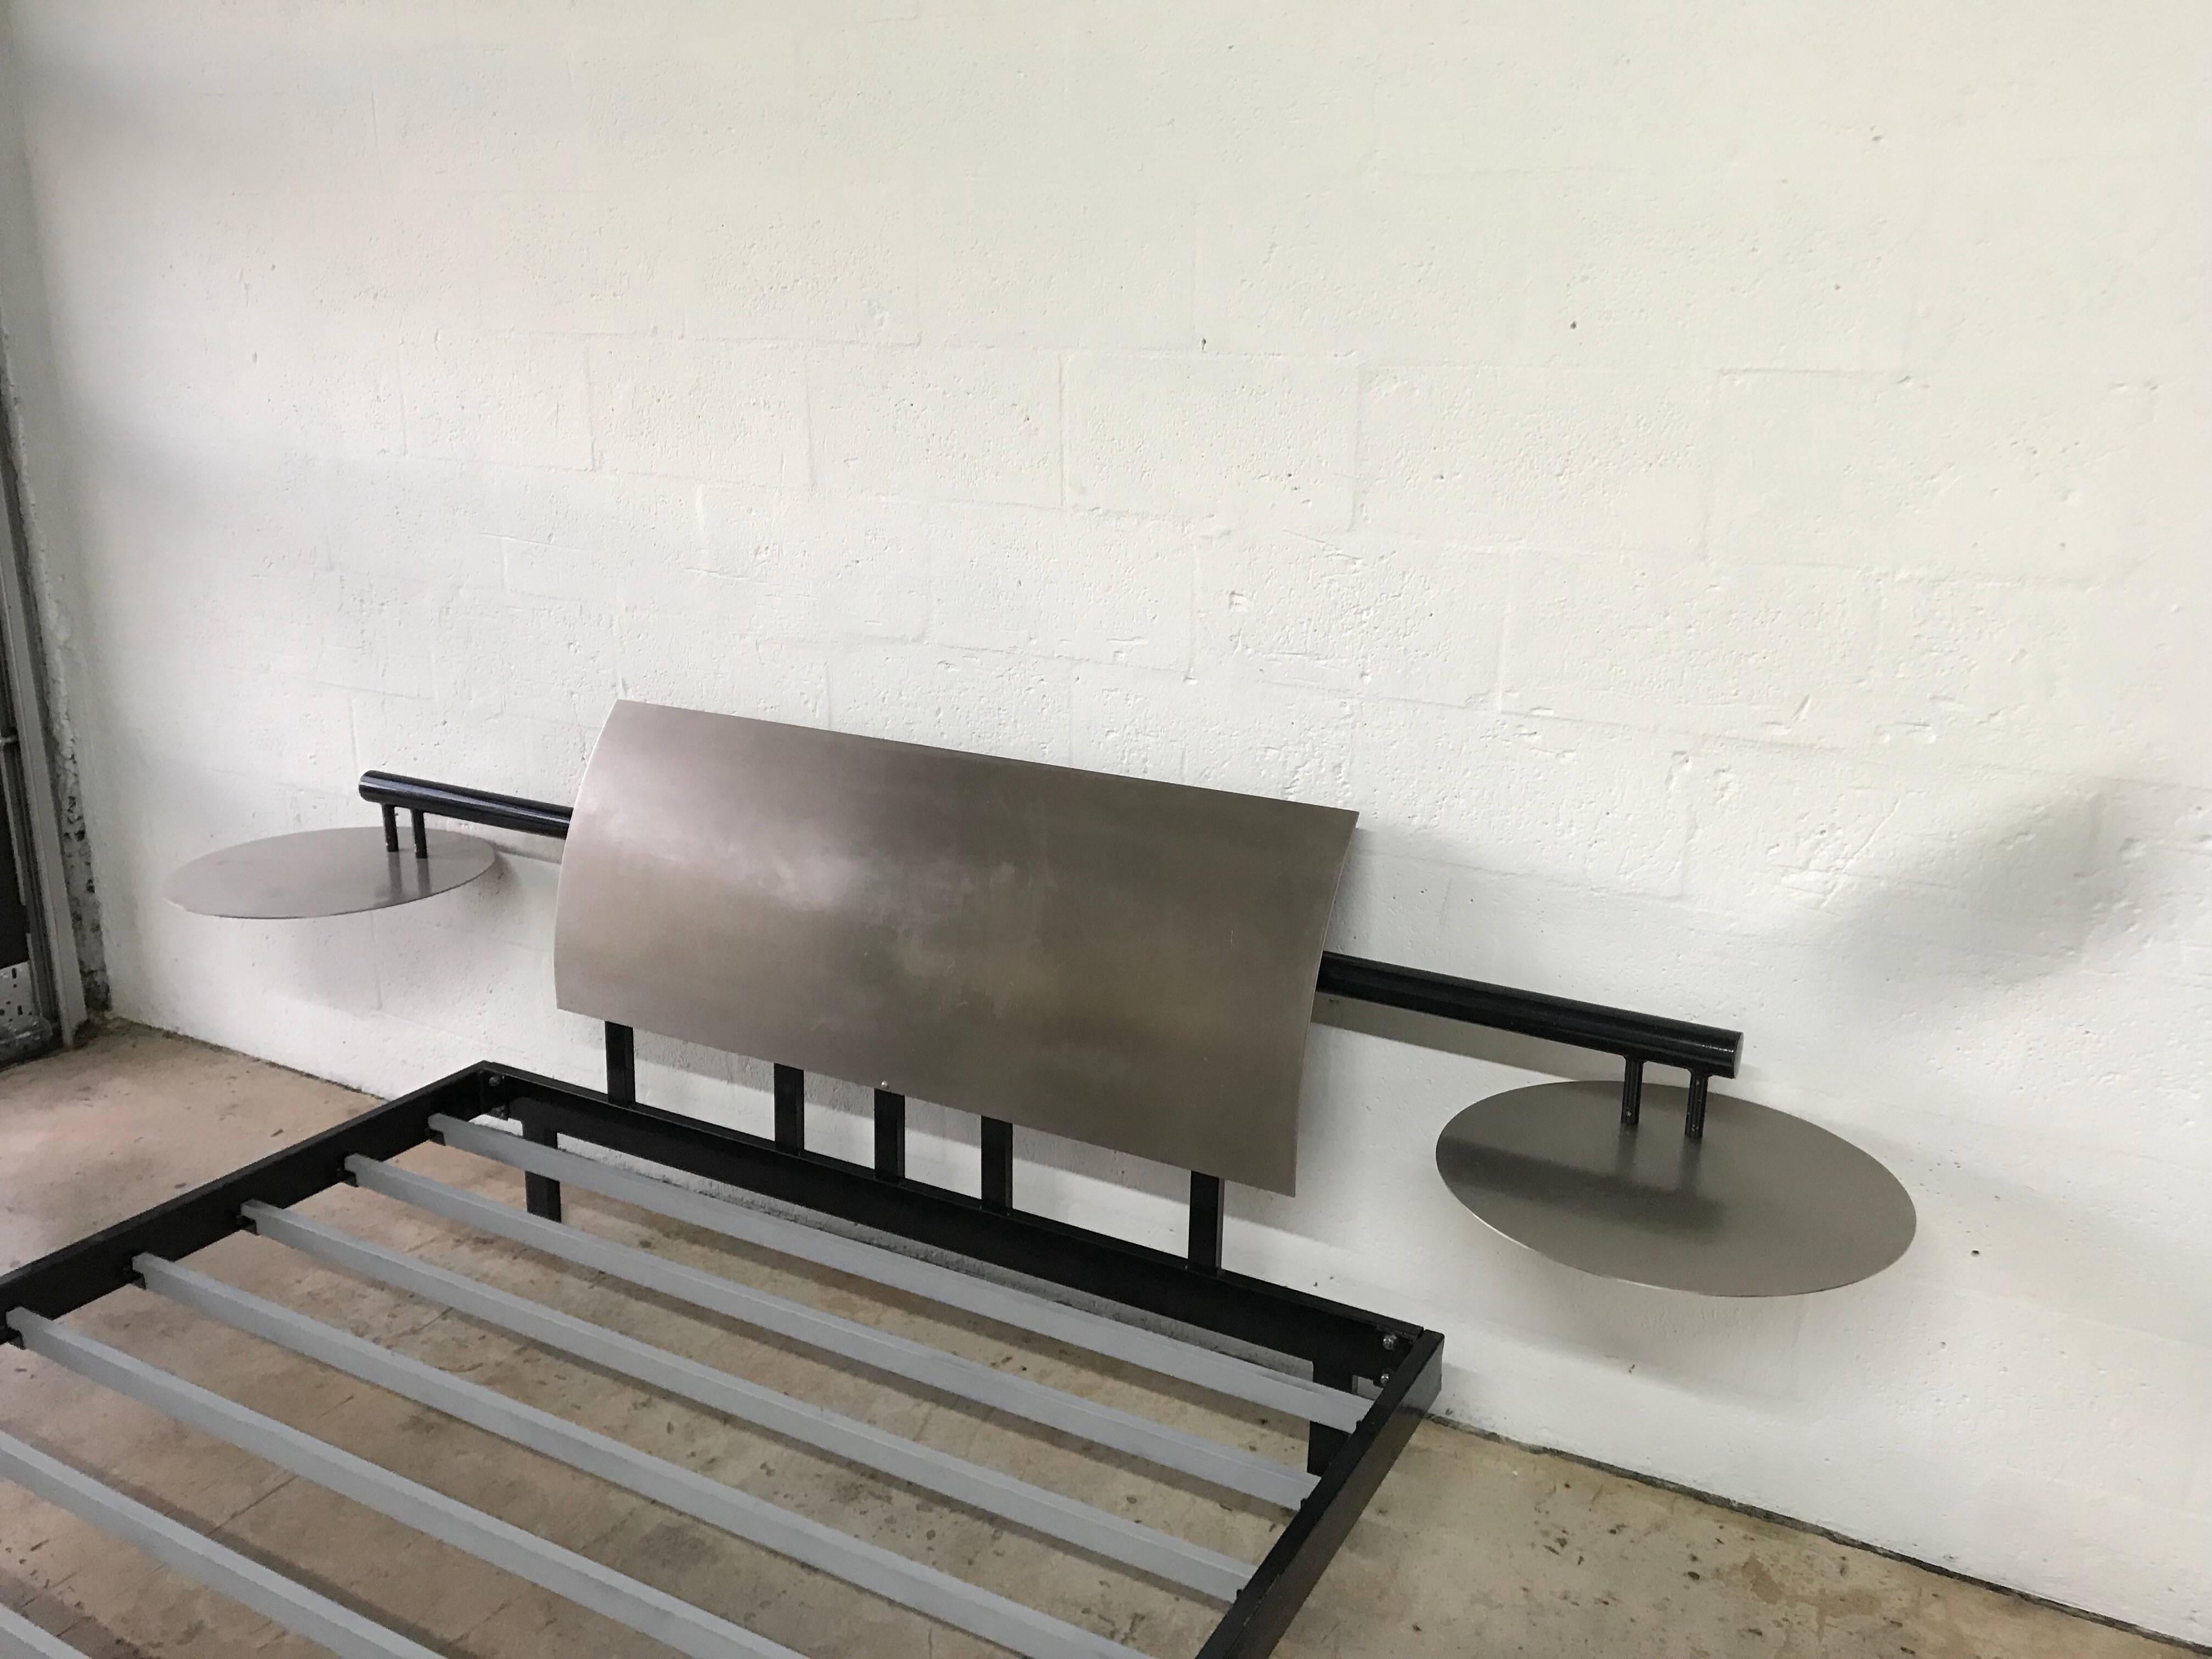 Postmodern enameled steel bed frame with a curved stainless steel headboard and integrated floating stainless steel nightstands, circa 1980s.

Additional dimensions:
Bed frame-
62” wide
10” high
Rails-
9” high
Nightstands-
19” diameter
21.5” high.
 